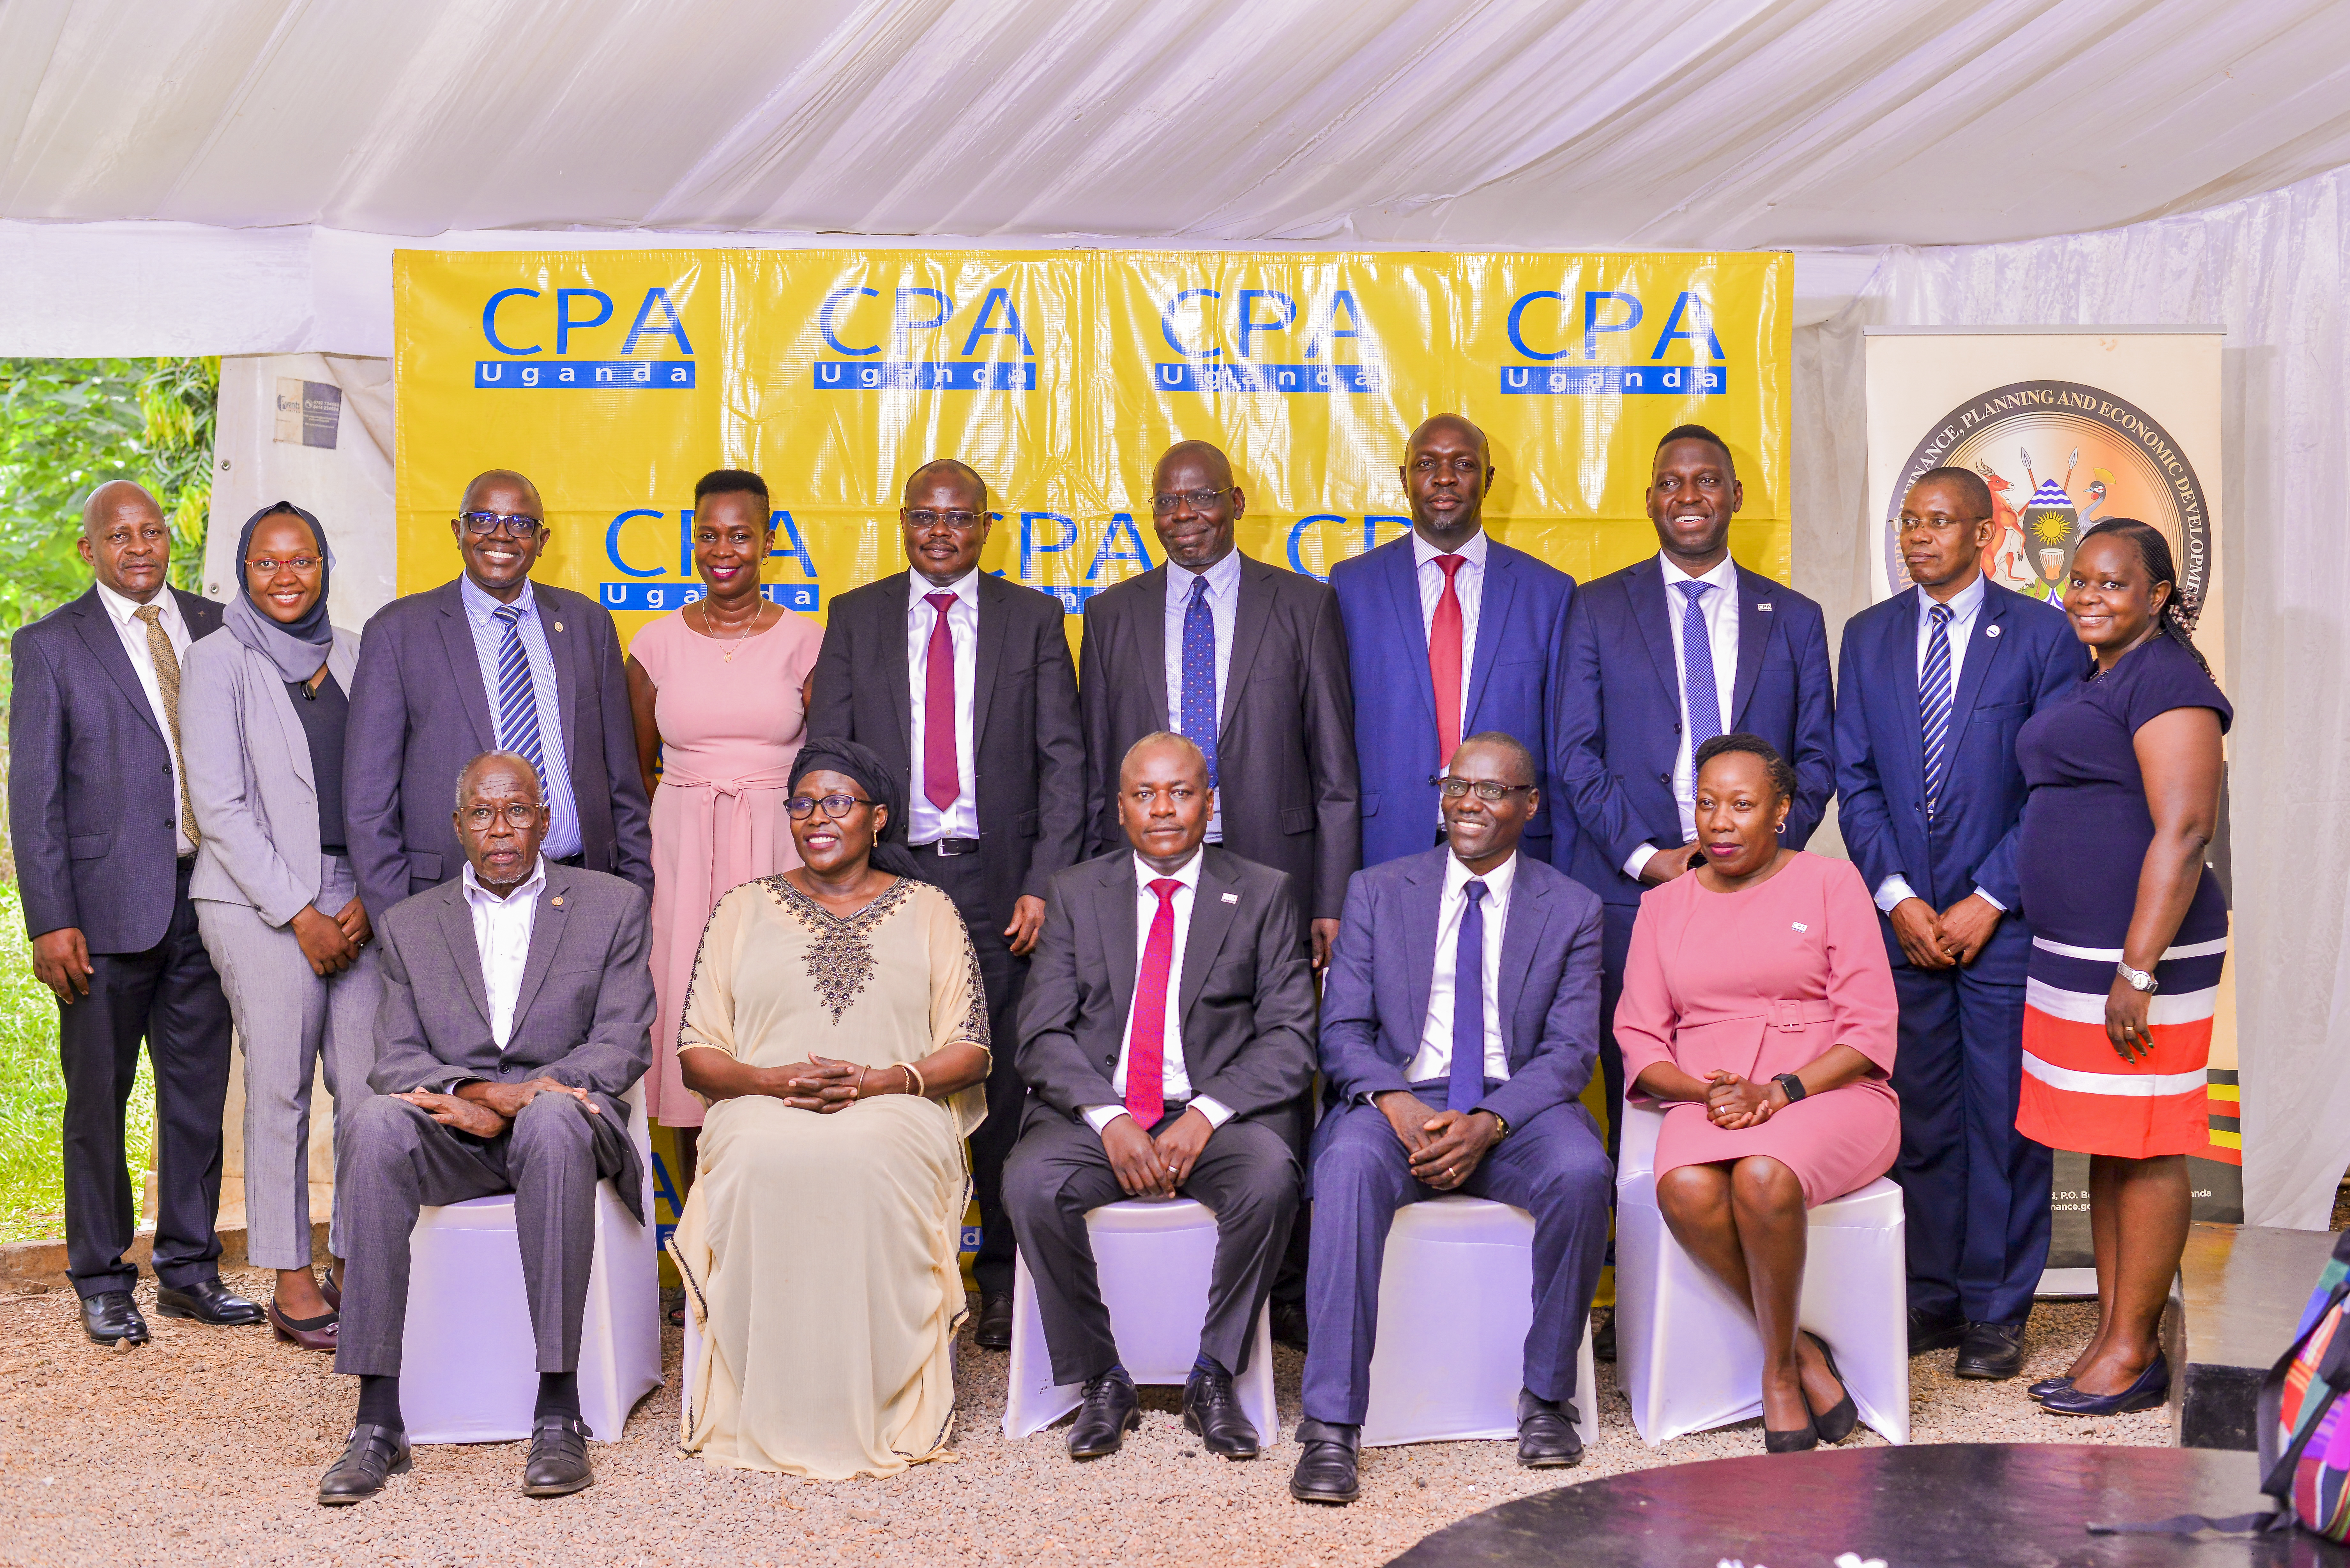 L-R seated CPA George Egaddu - ICPAU 1st President, CPA Keto Kayemba - PAFA President, CPA Ronald Mutumba - ICPAU Vice President, Prof. Vincent Bagire - Keynote speaker, CPA Laura Orobia ICPAU Council member with other ICPAU Council members and the Events Committee. Standing (3rd L) is 9th ICPAU President, CPA Constant Mayende.